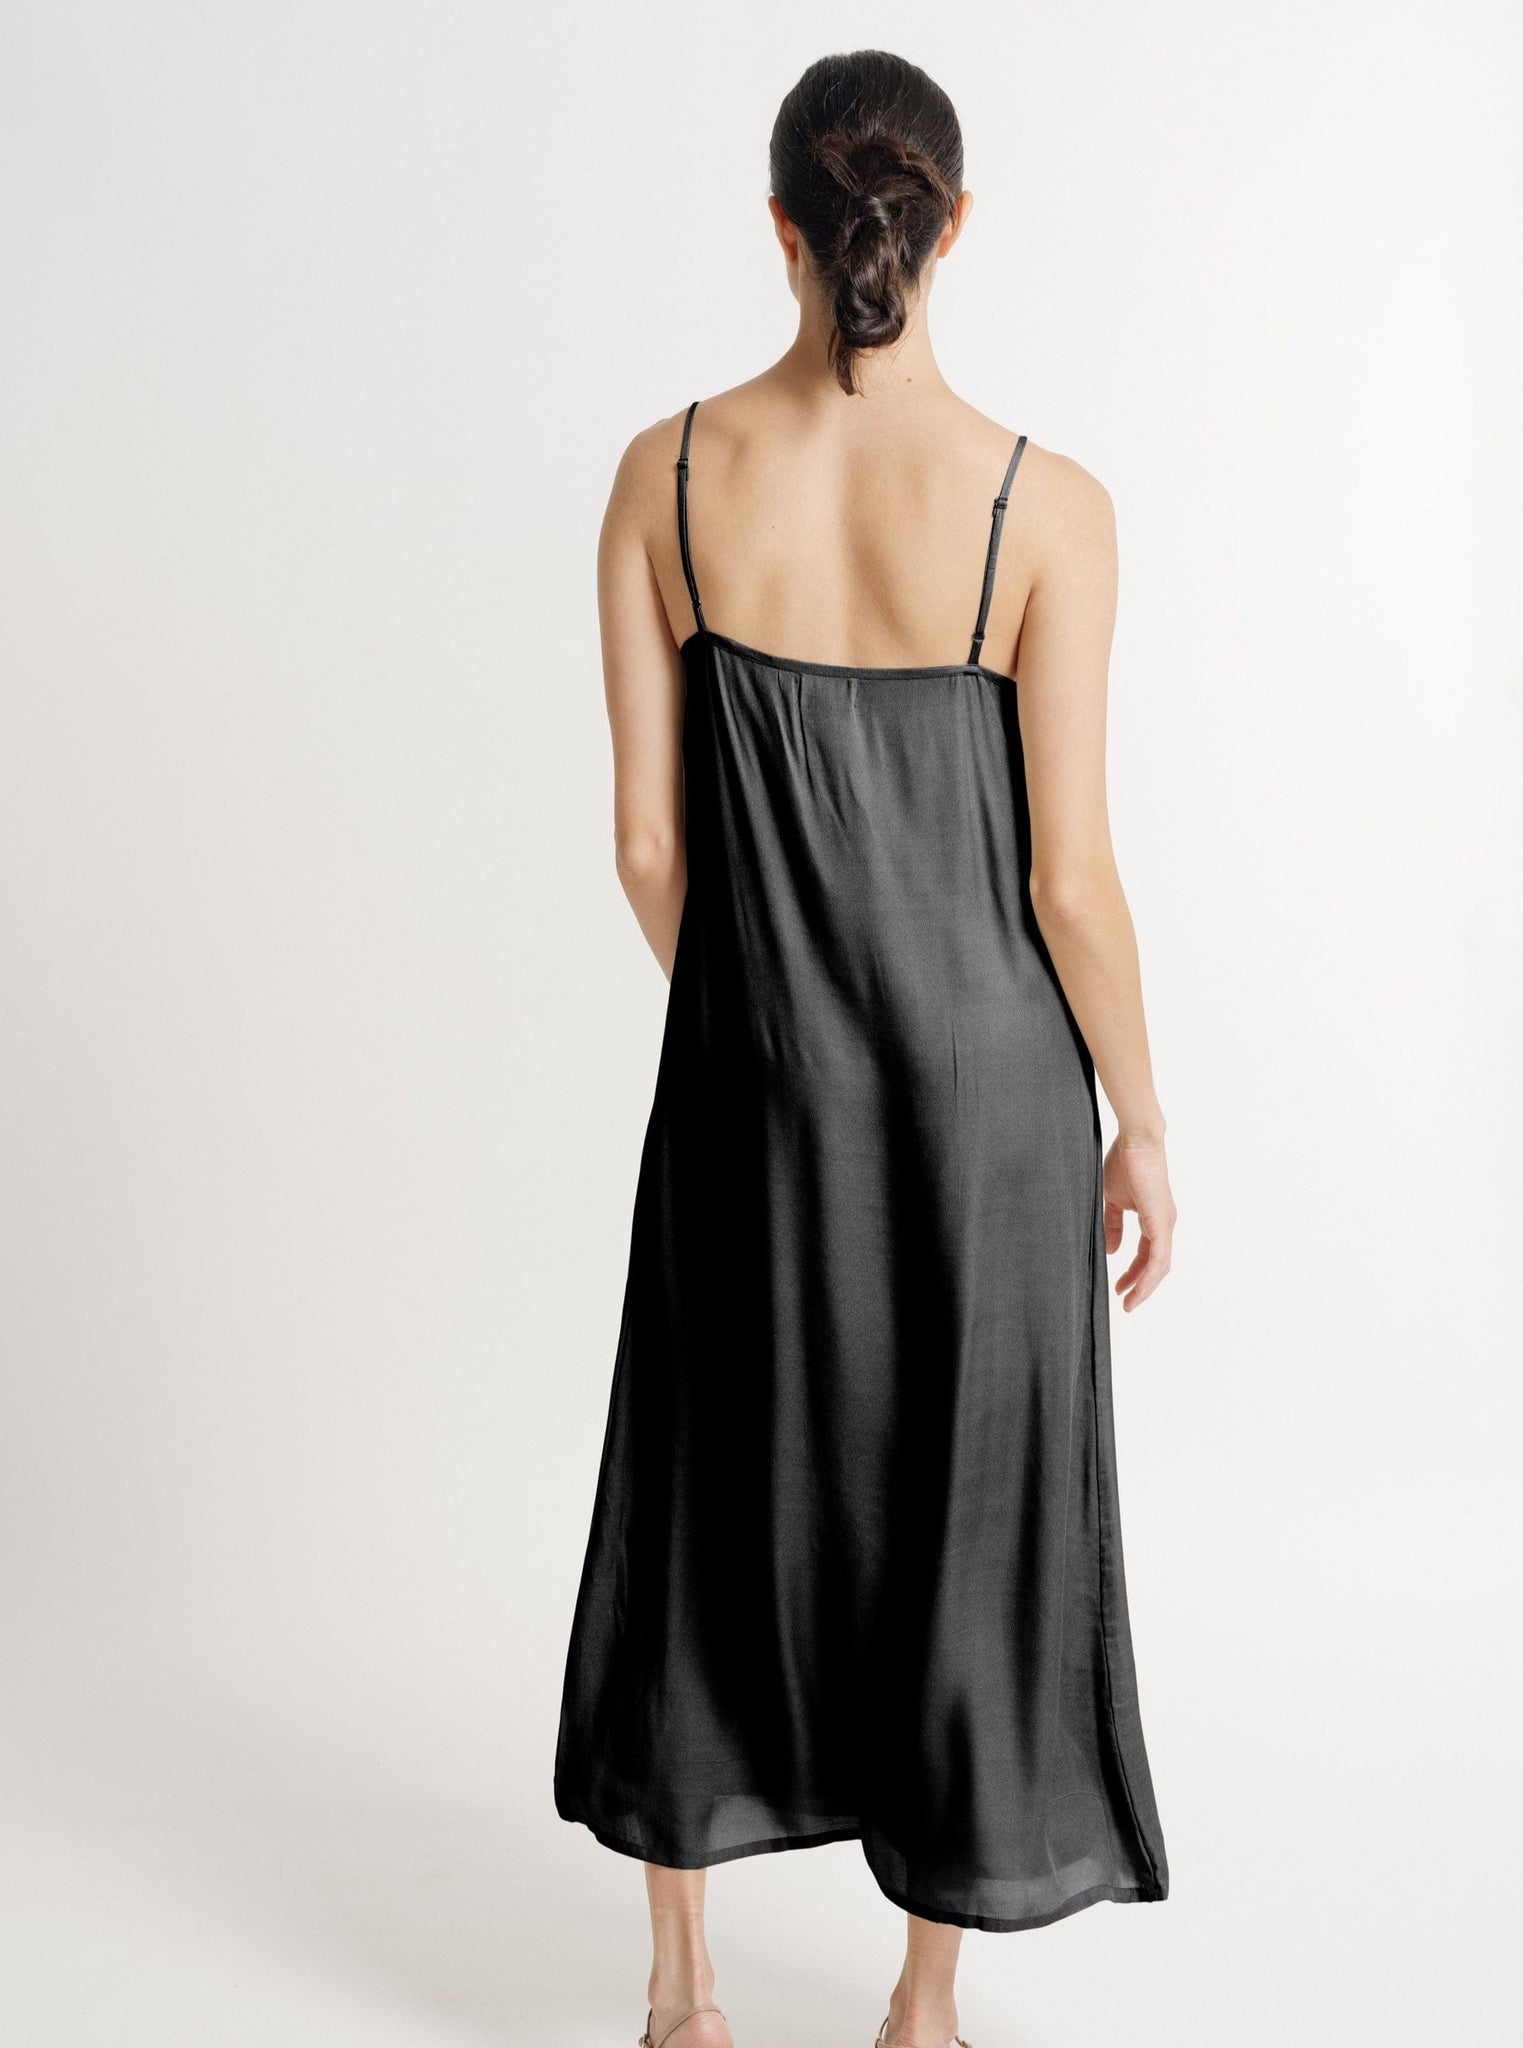 The sustainably made Kate Dress - Black in a maxi length showcases a beautifully flowing silhouette from the back view.